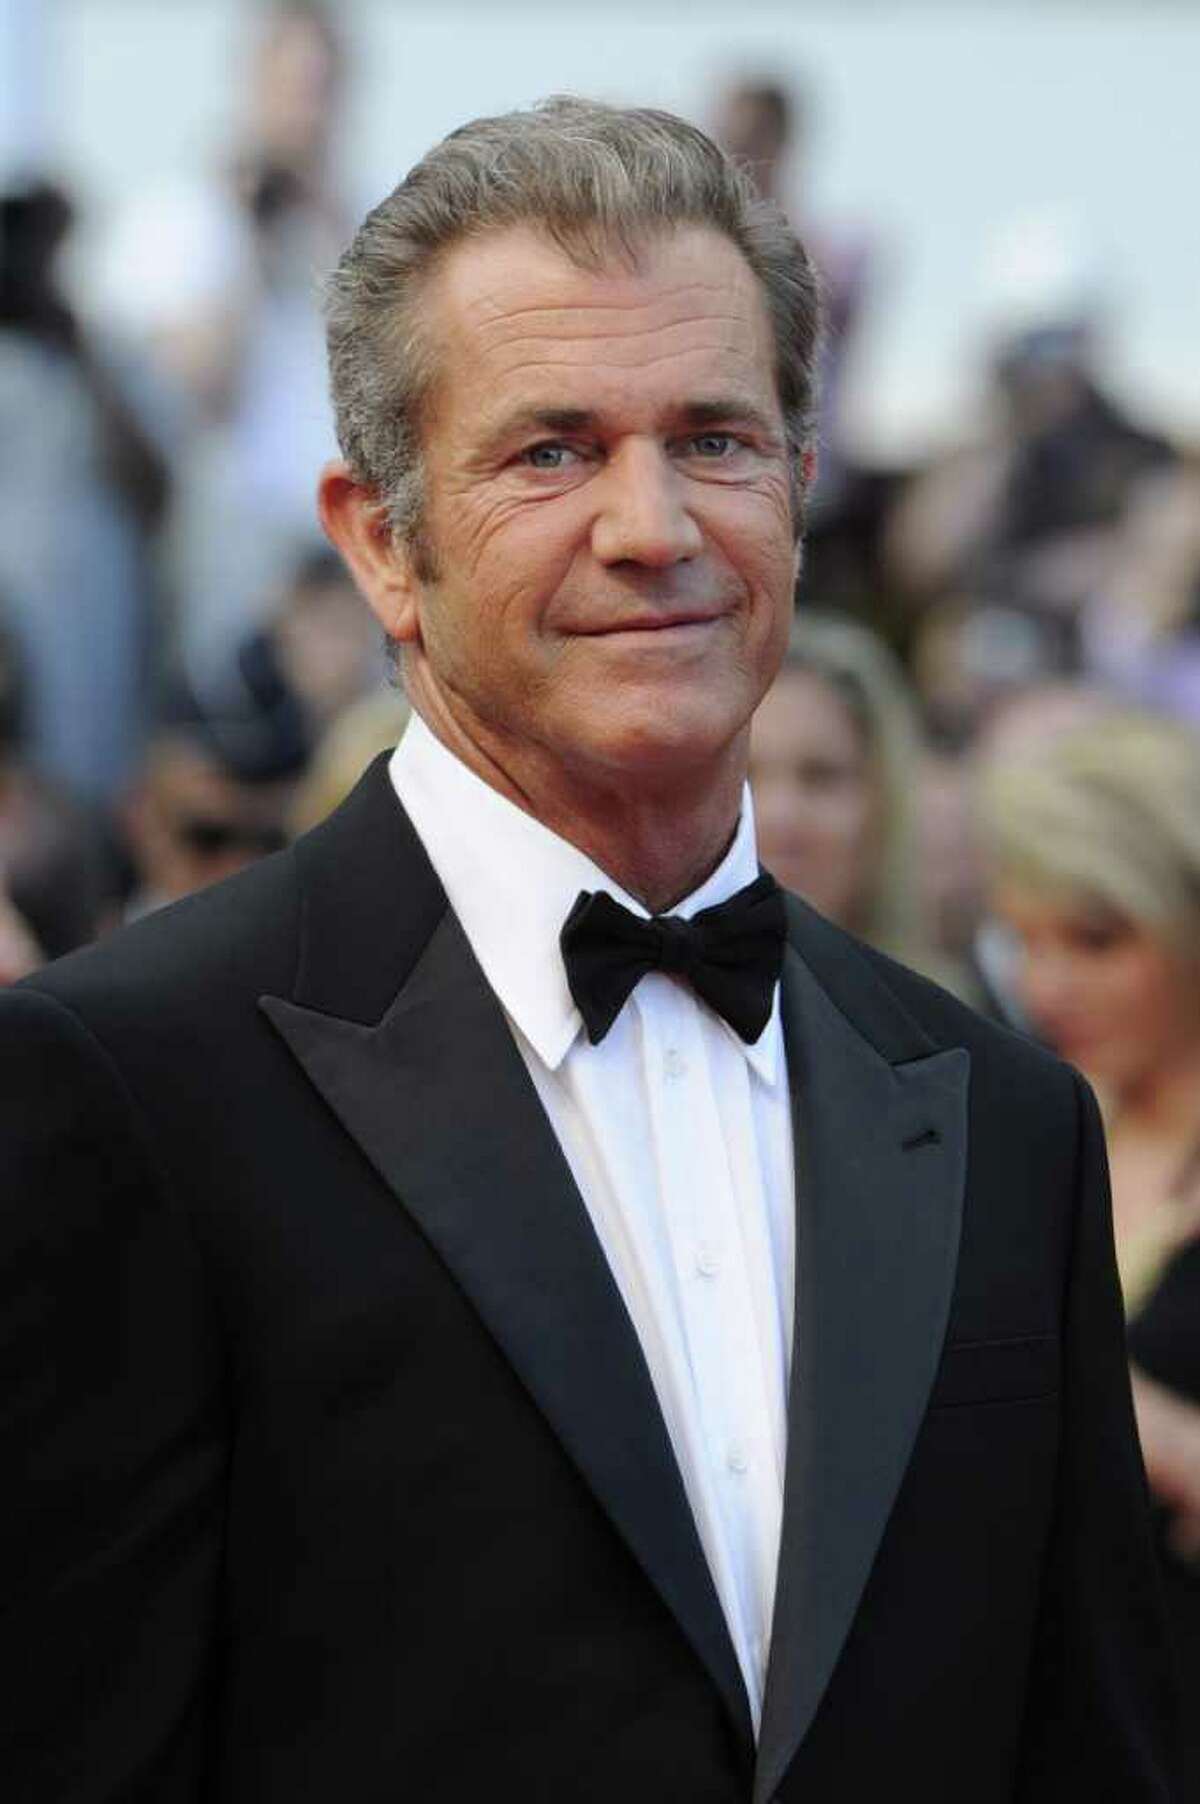 Mel Gibson was married to another woman when he hooked up with Oksana Grigorieva and fathered a child. That relationship did not end well to put it lightly.